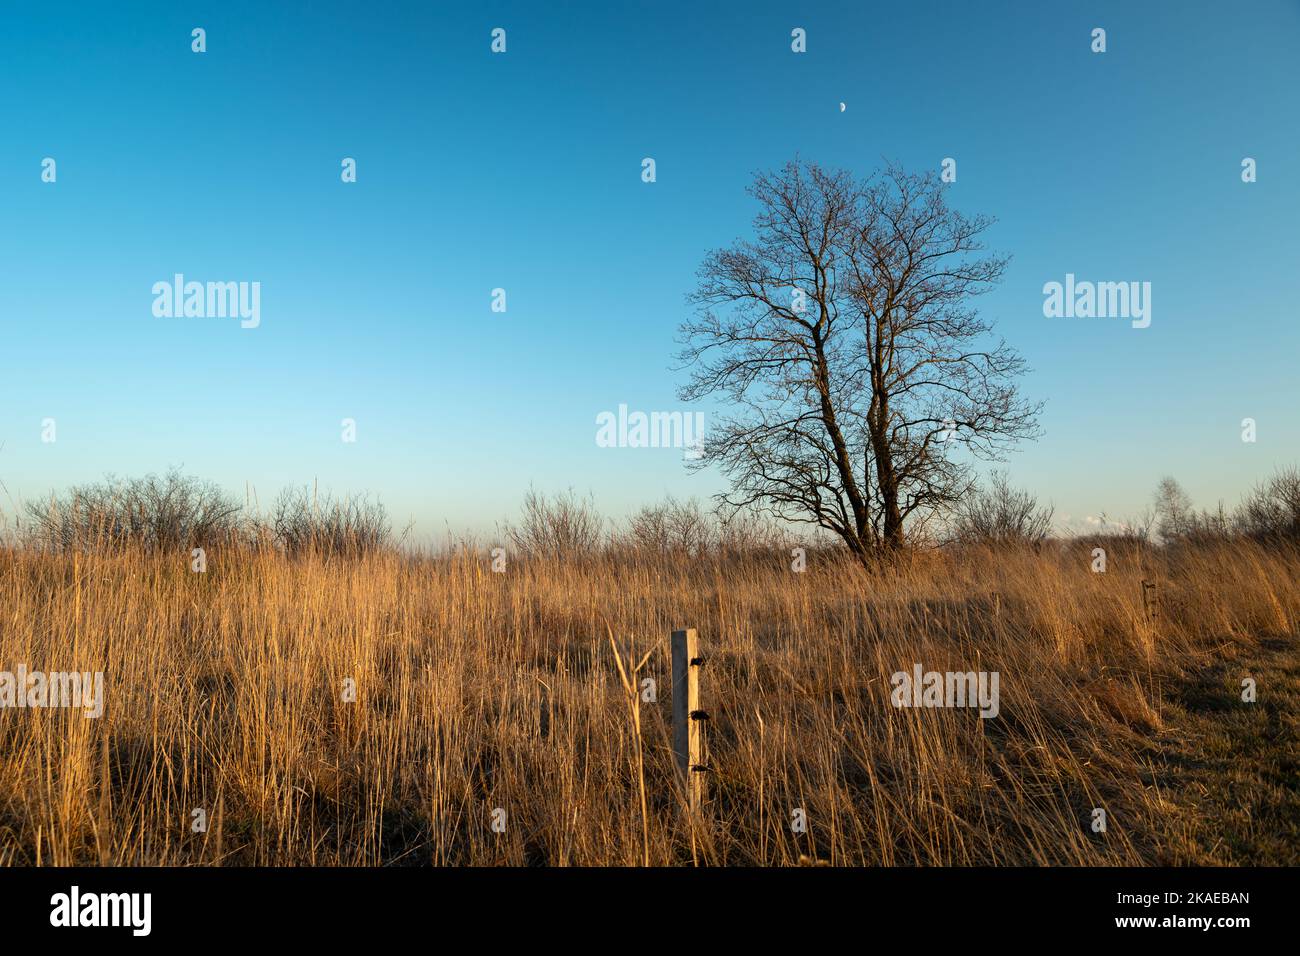 A large tree without leaves and a dry meadow, evening view Stock Photo